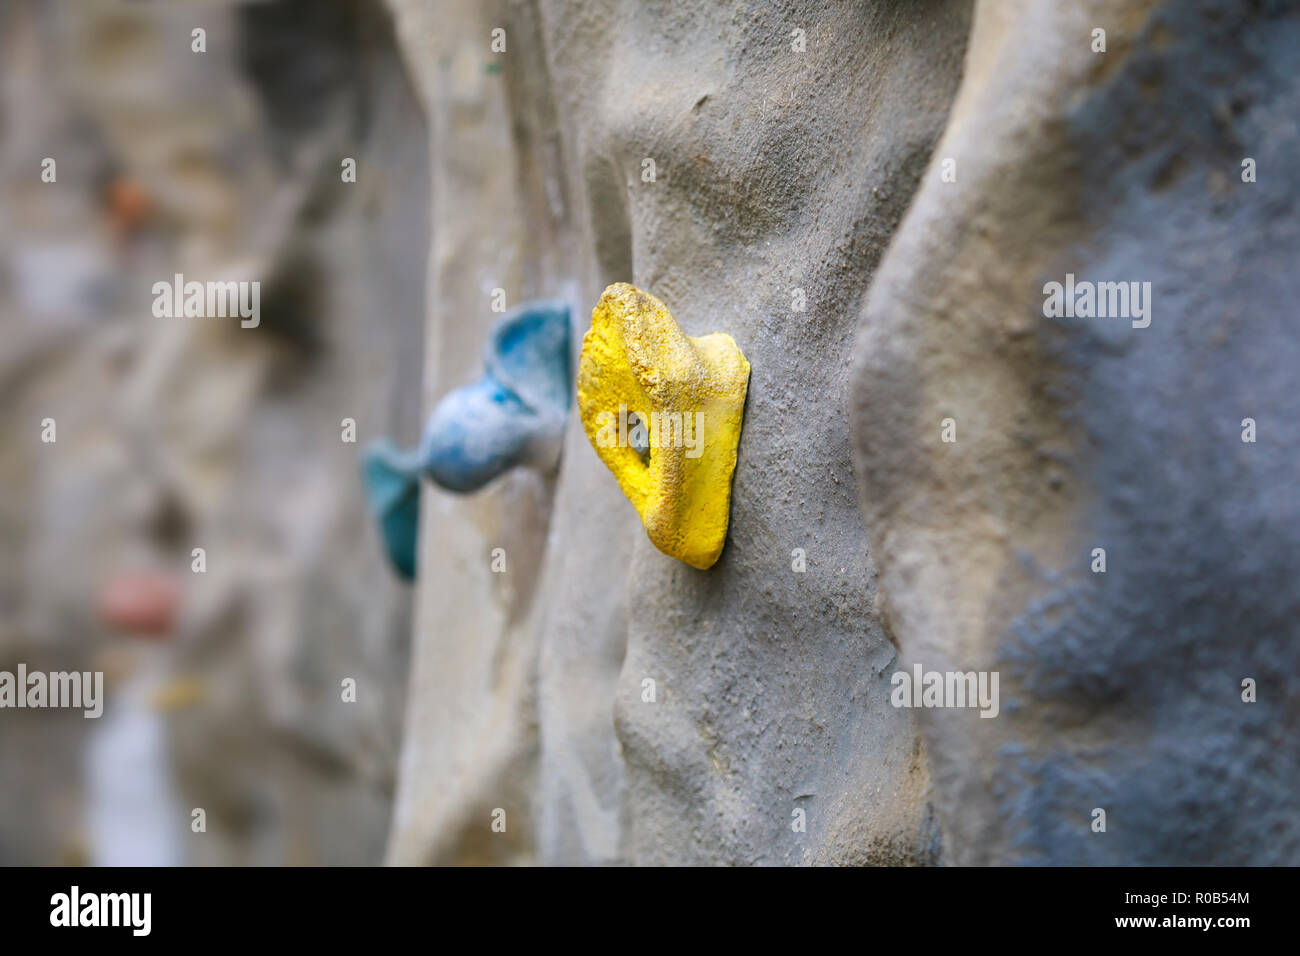 Artificial climbing wall with yellow grip Stock Photo